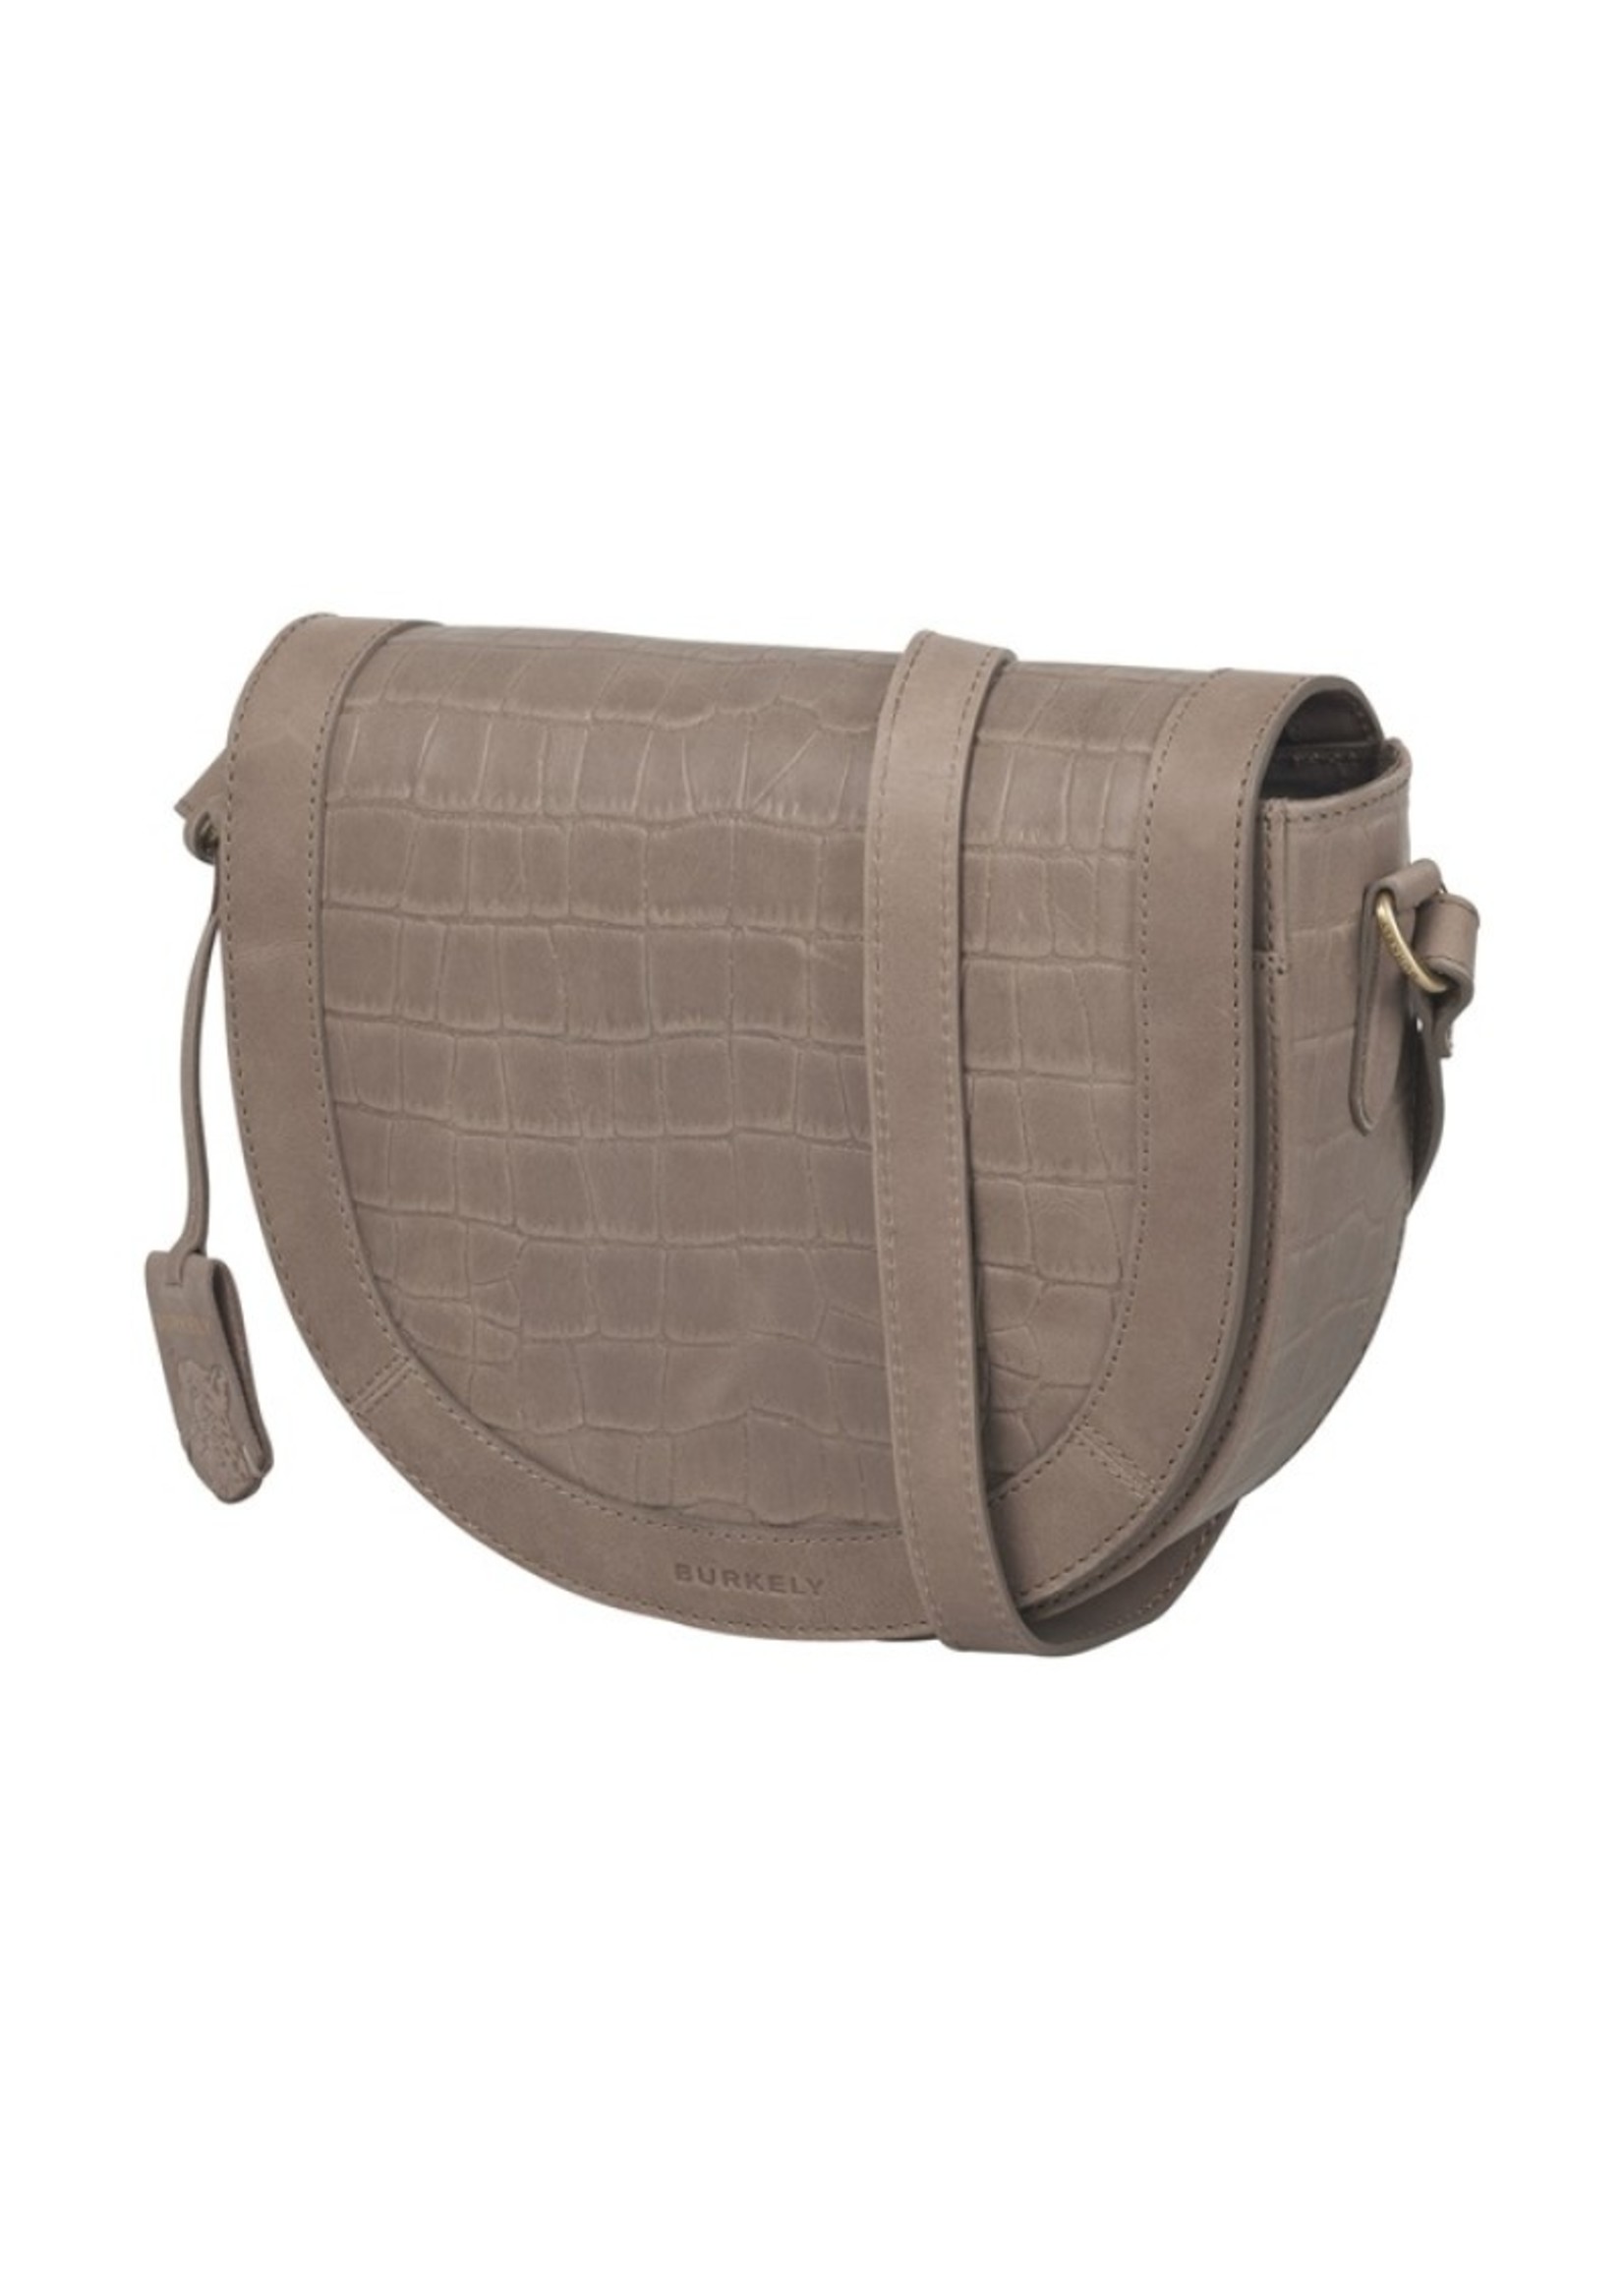 Burkely Burkely, Crossover L half moon, taupe